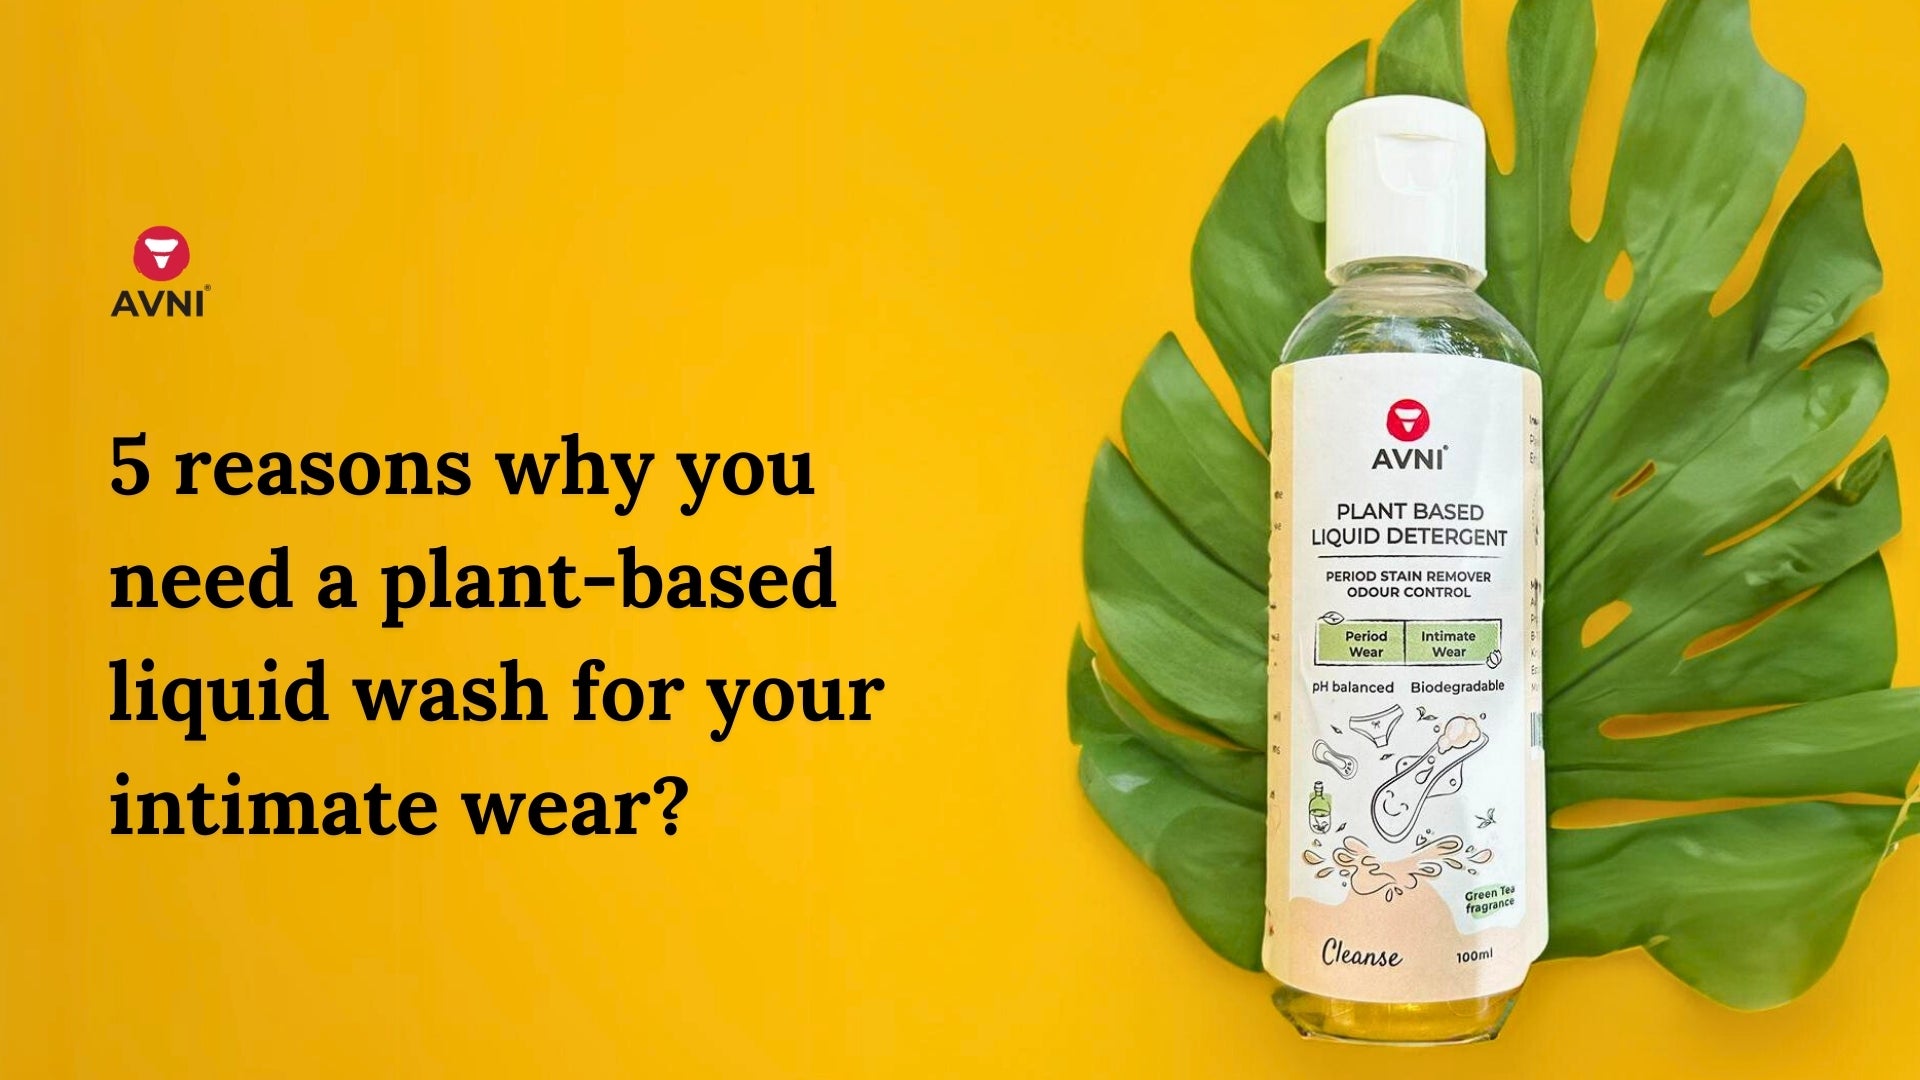 5 reasons why you need a plant-based liquid wash for your intimate wear?